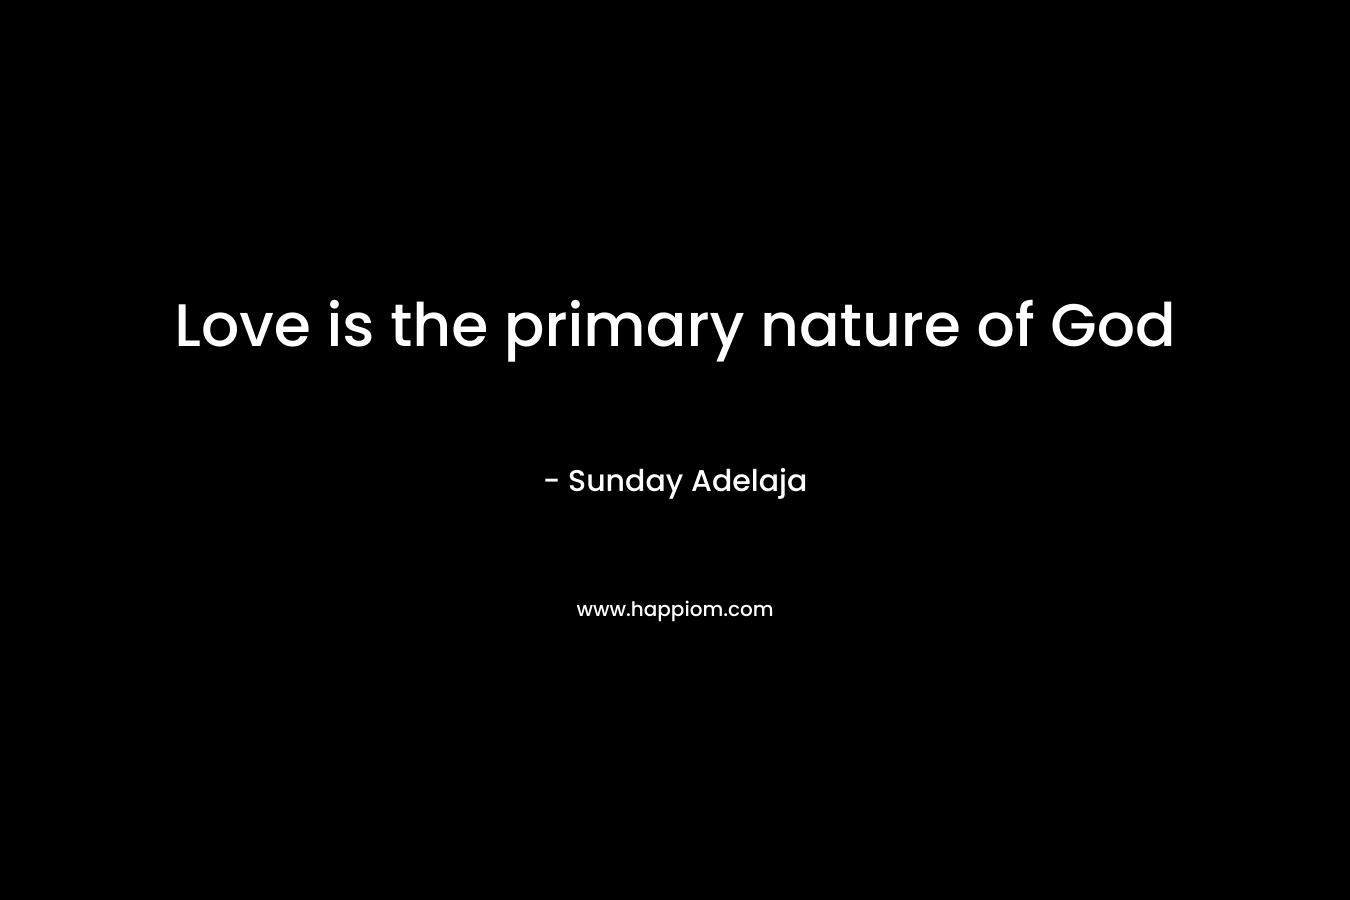 Love is the primary nature of God